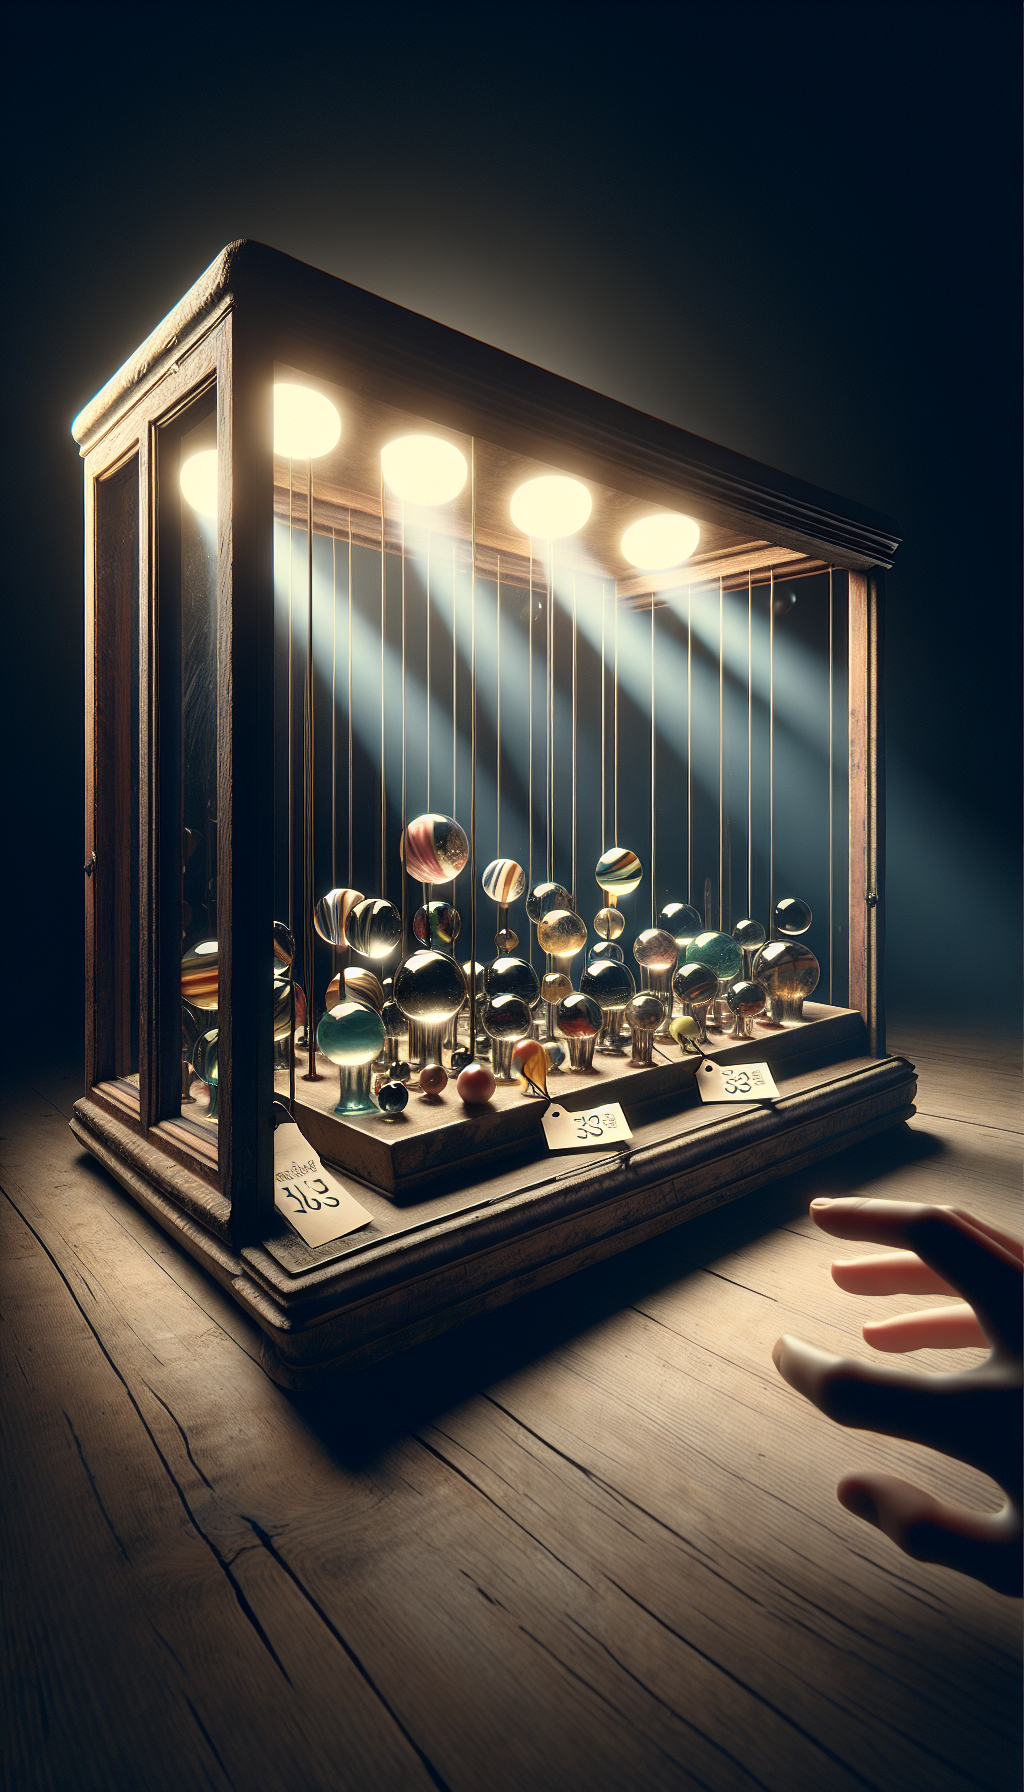 An elegantly aged wooden display case opens to reveal an array of antique marbles, each illuminated by a single ray of light, with transparent price tags floating above, some bearing hefty sums while others question marks. The juxtaposition of marbles as valuable antiques versus mere child's playthings is highlighted by the subtle shadow of a child reaching for them, blending realism with a touch of whimsy.